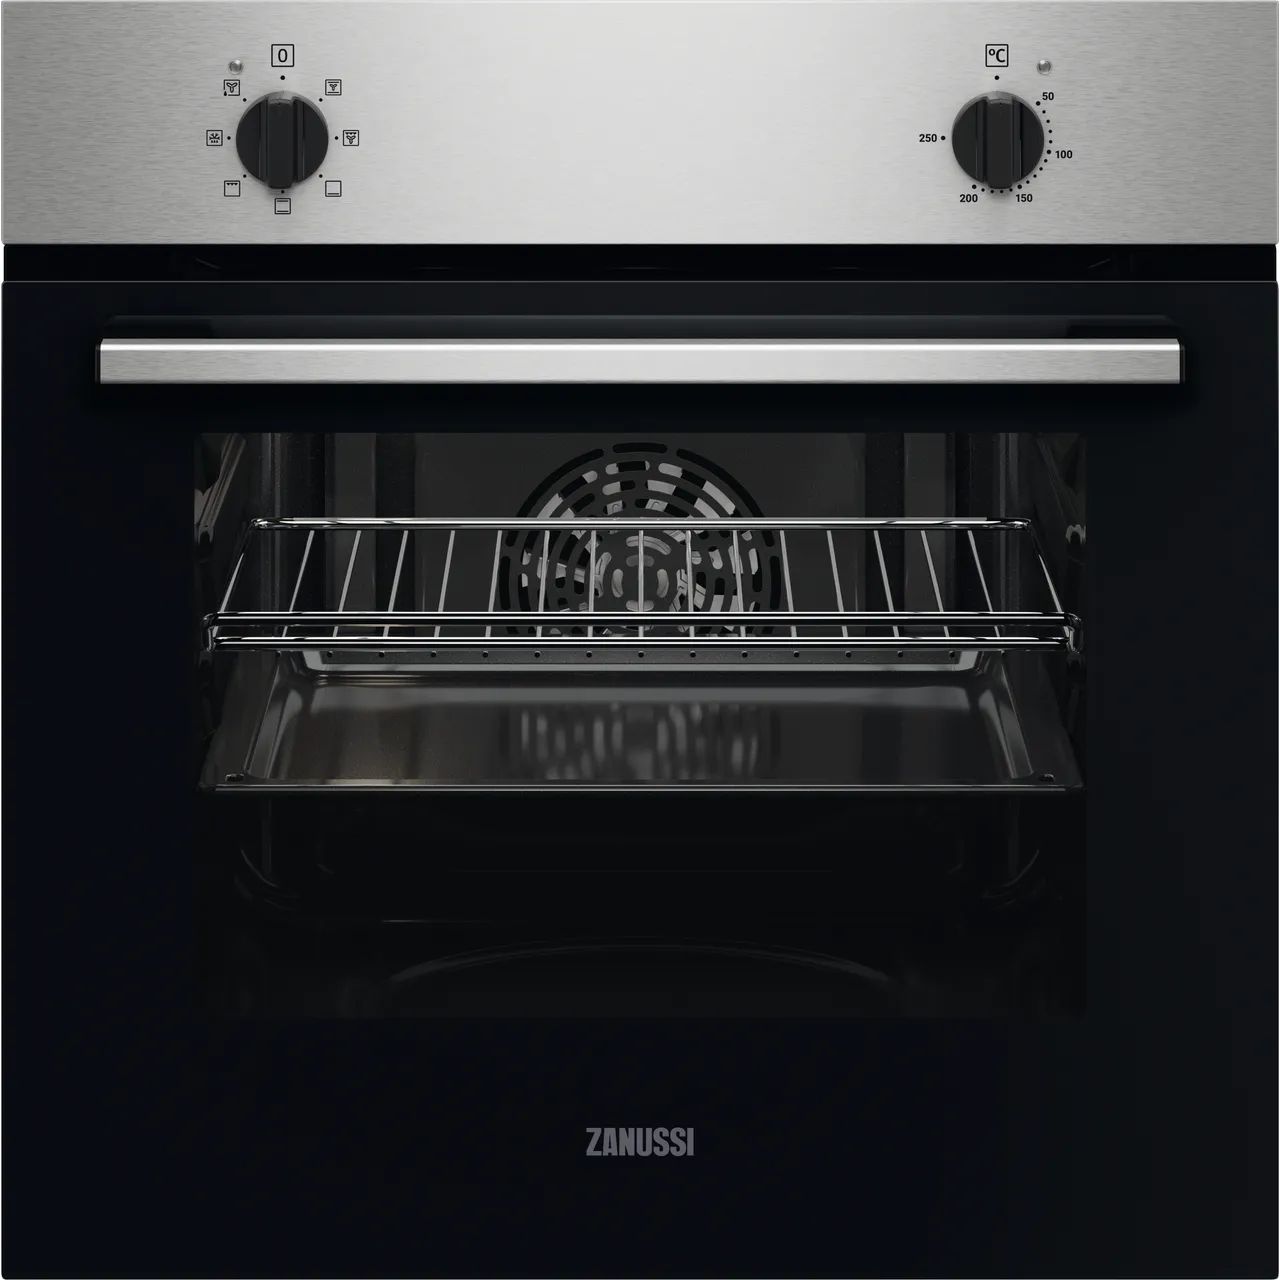 Zanussi 58L Built-In Electric Single Oven & Ceramic Hob Package - Stainless Steel/Black | ZOHNC0X2 (7585366081724)